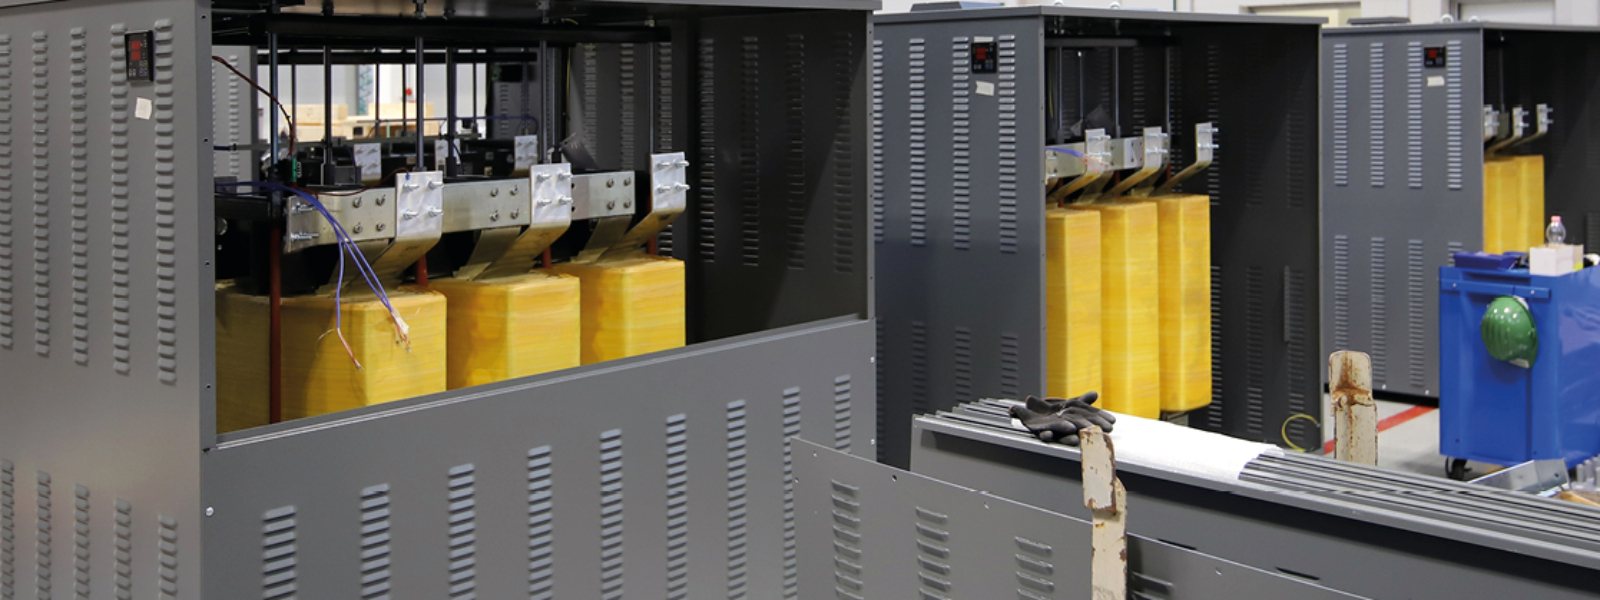 ISOLATION TRANSFORMERS FOR DATA CENTERS